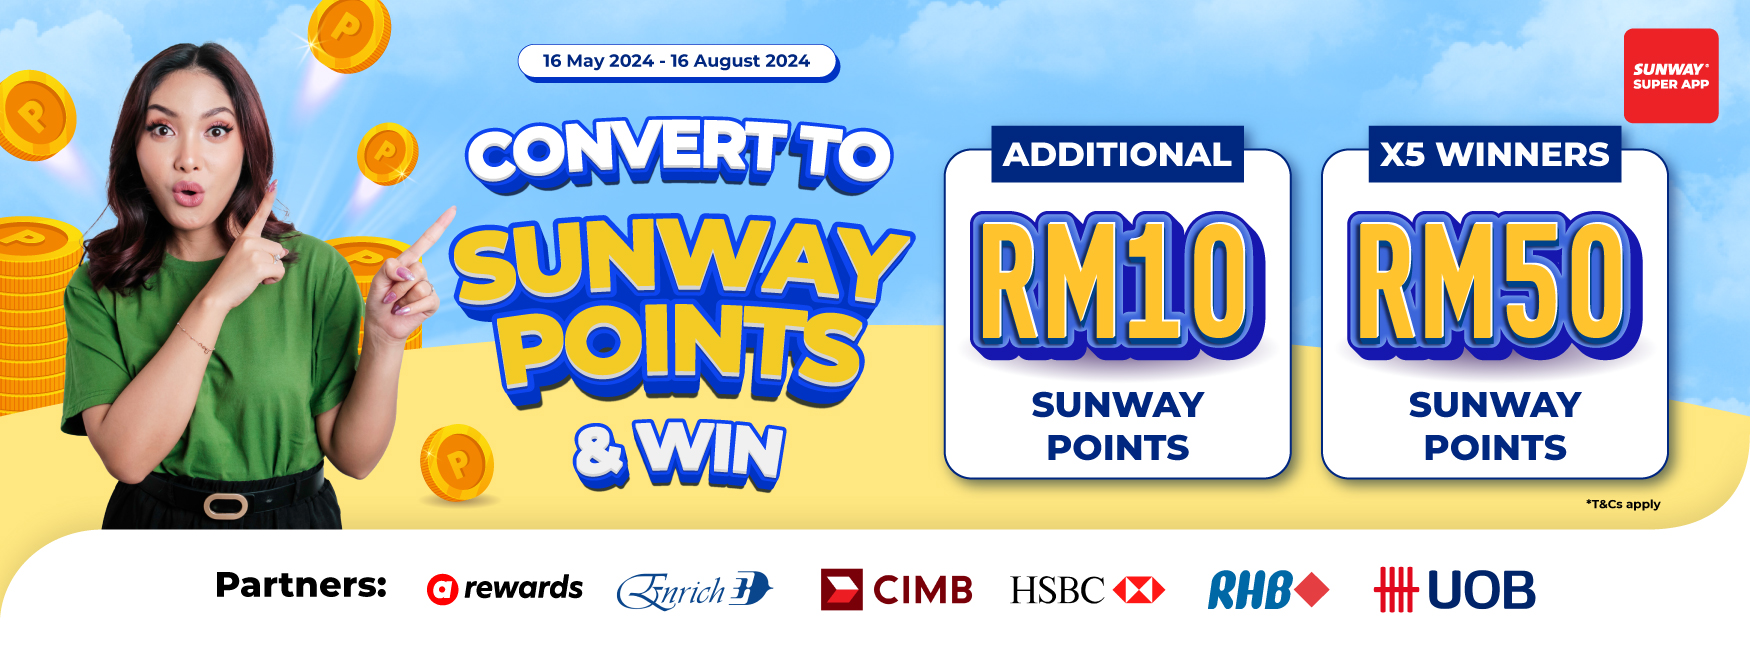 Convert to Sunway Points & Win exciting prizes today!